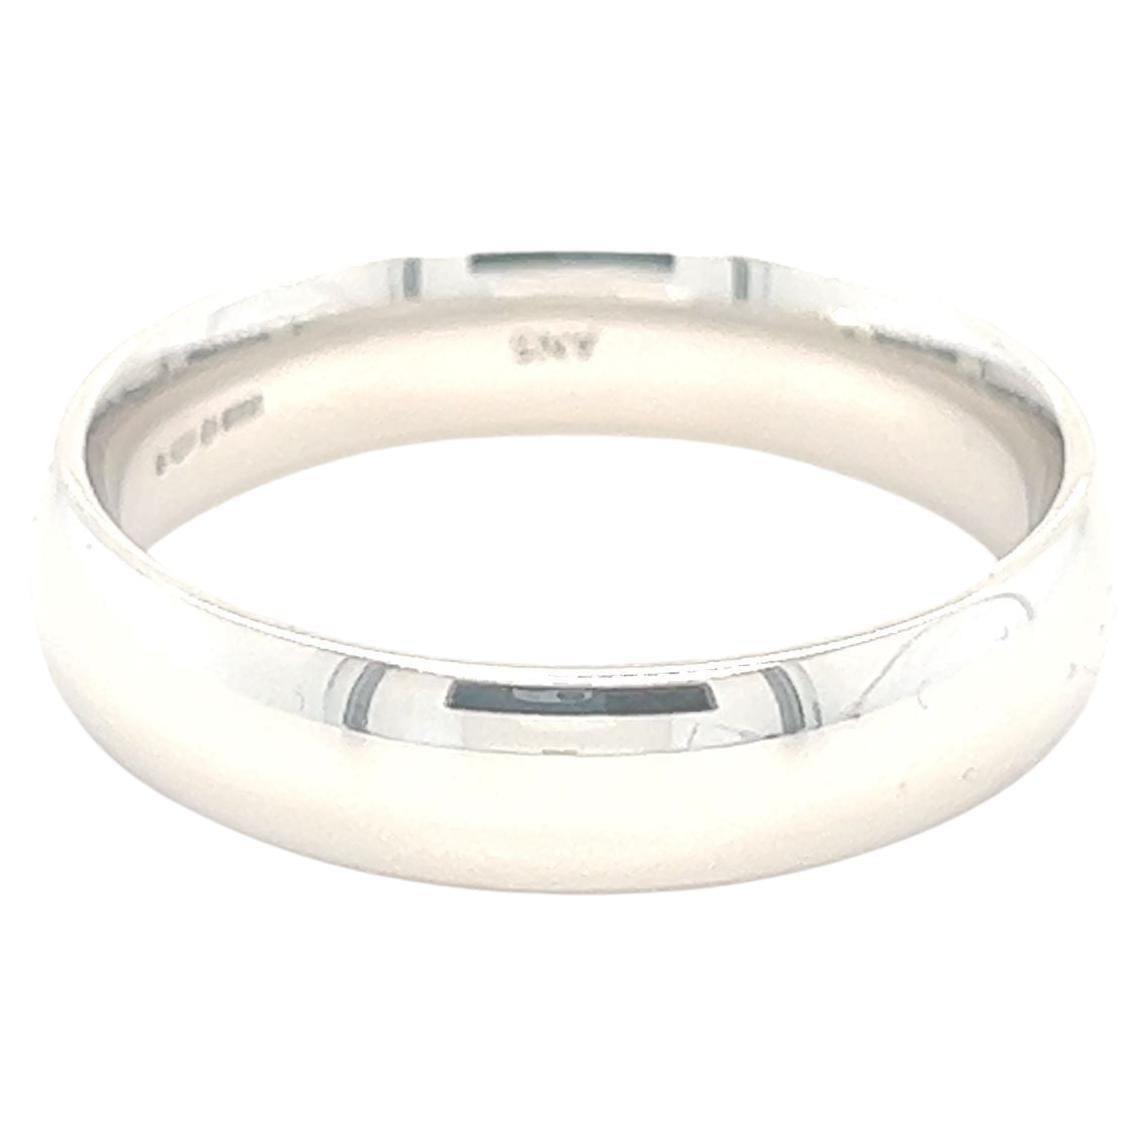 Platinum Wedding band Heavy Gauge Court Band, made in London For Sale